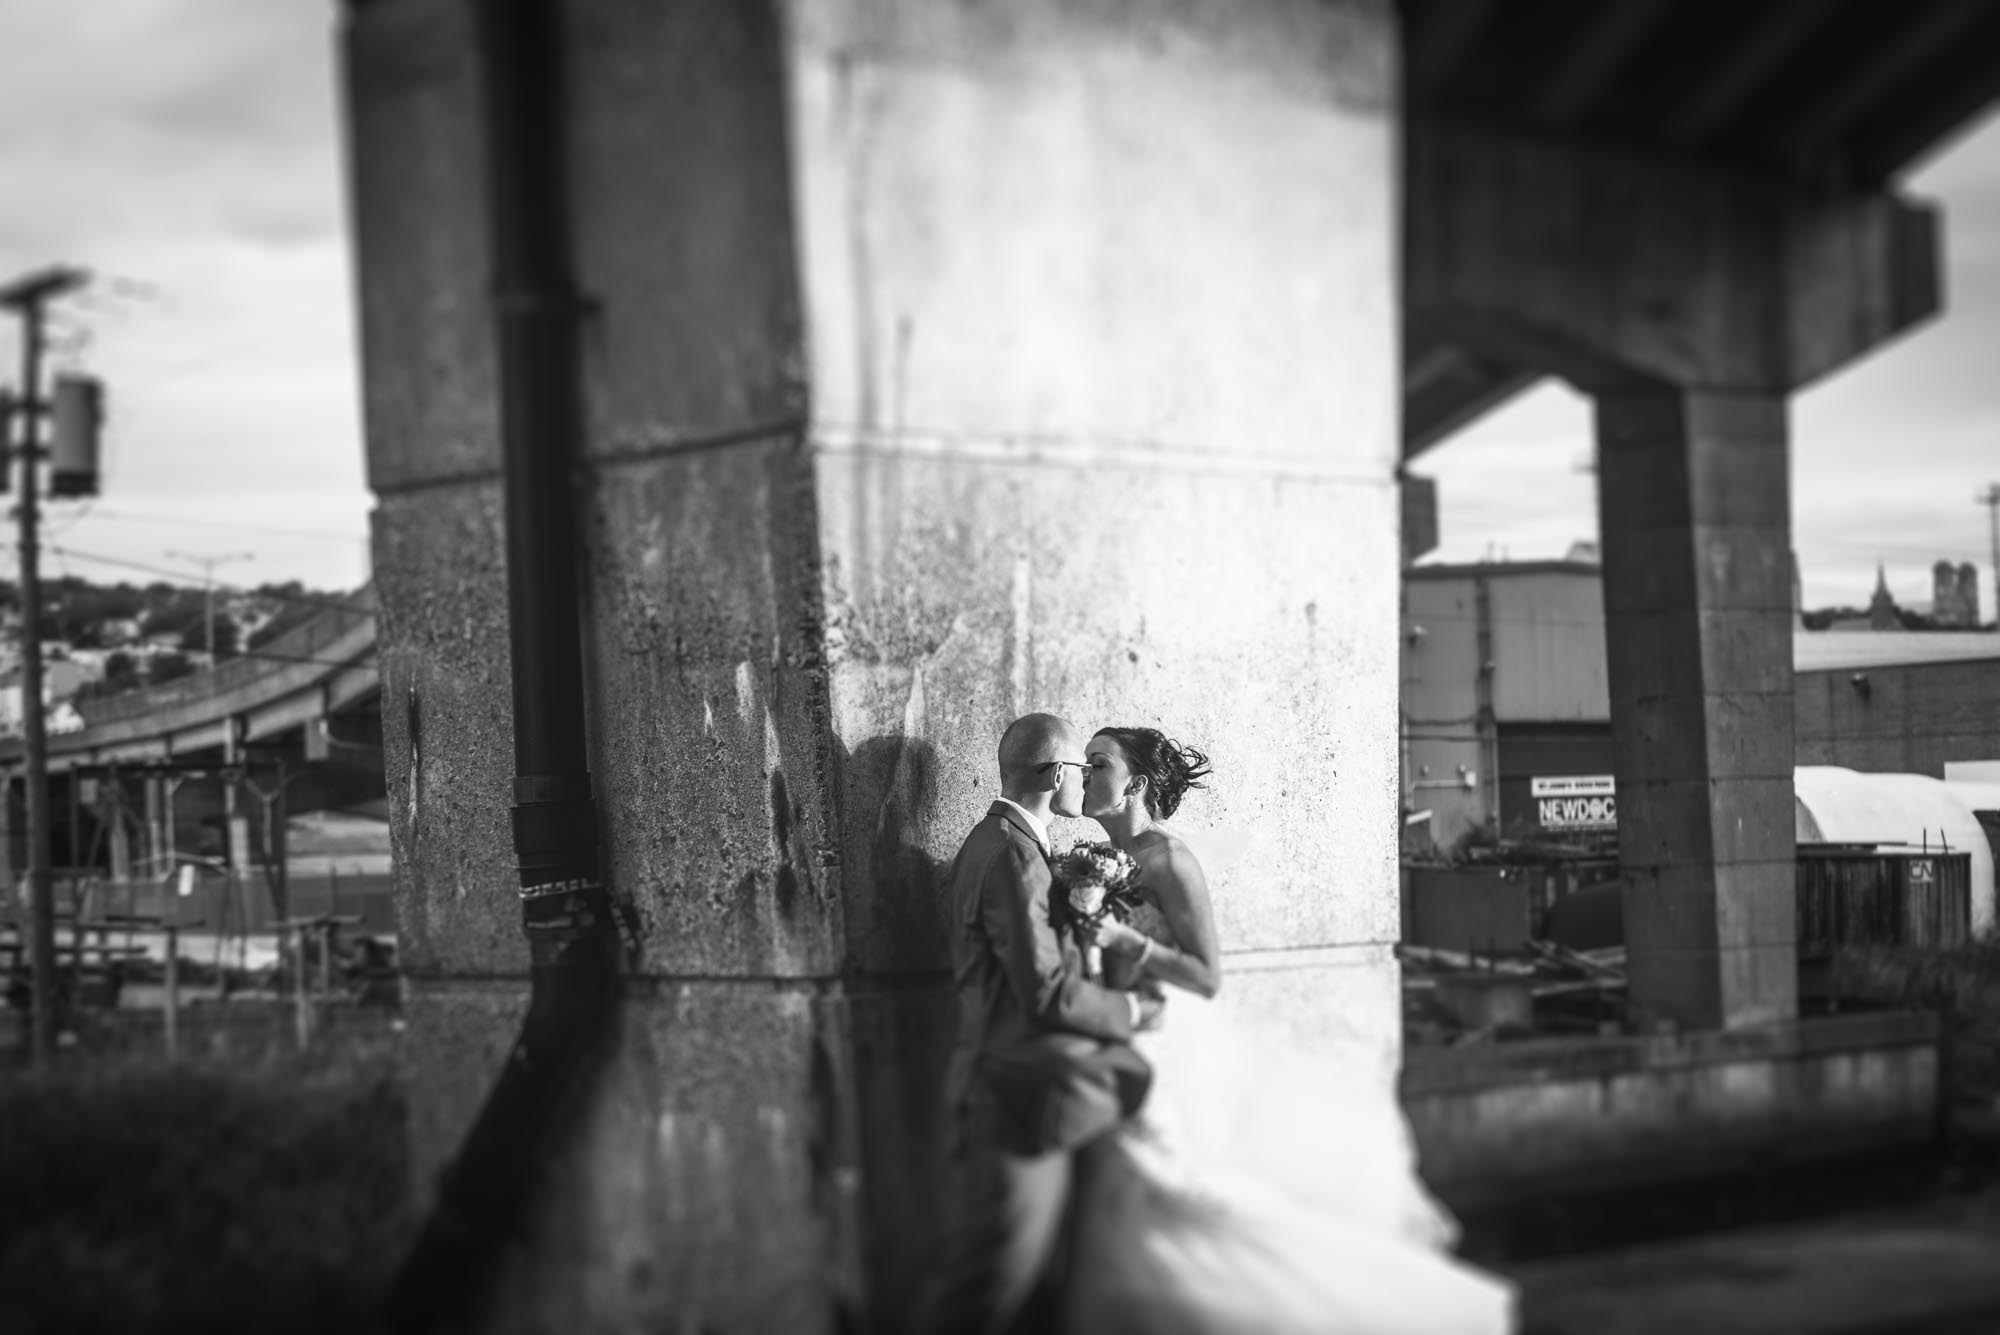 Under a overpass a bride and groom kiss in a moody and grundgy black and white photograph